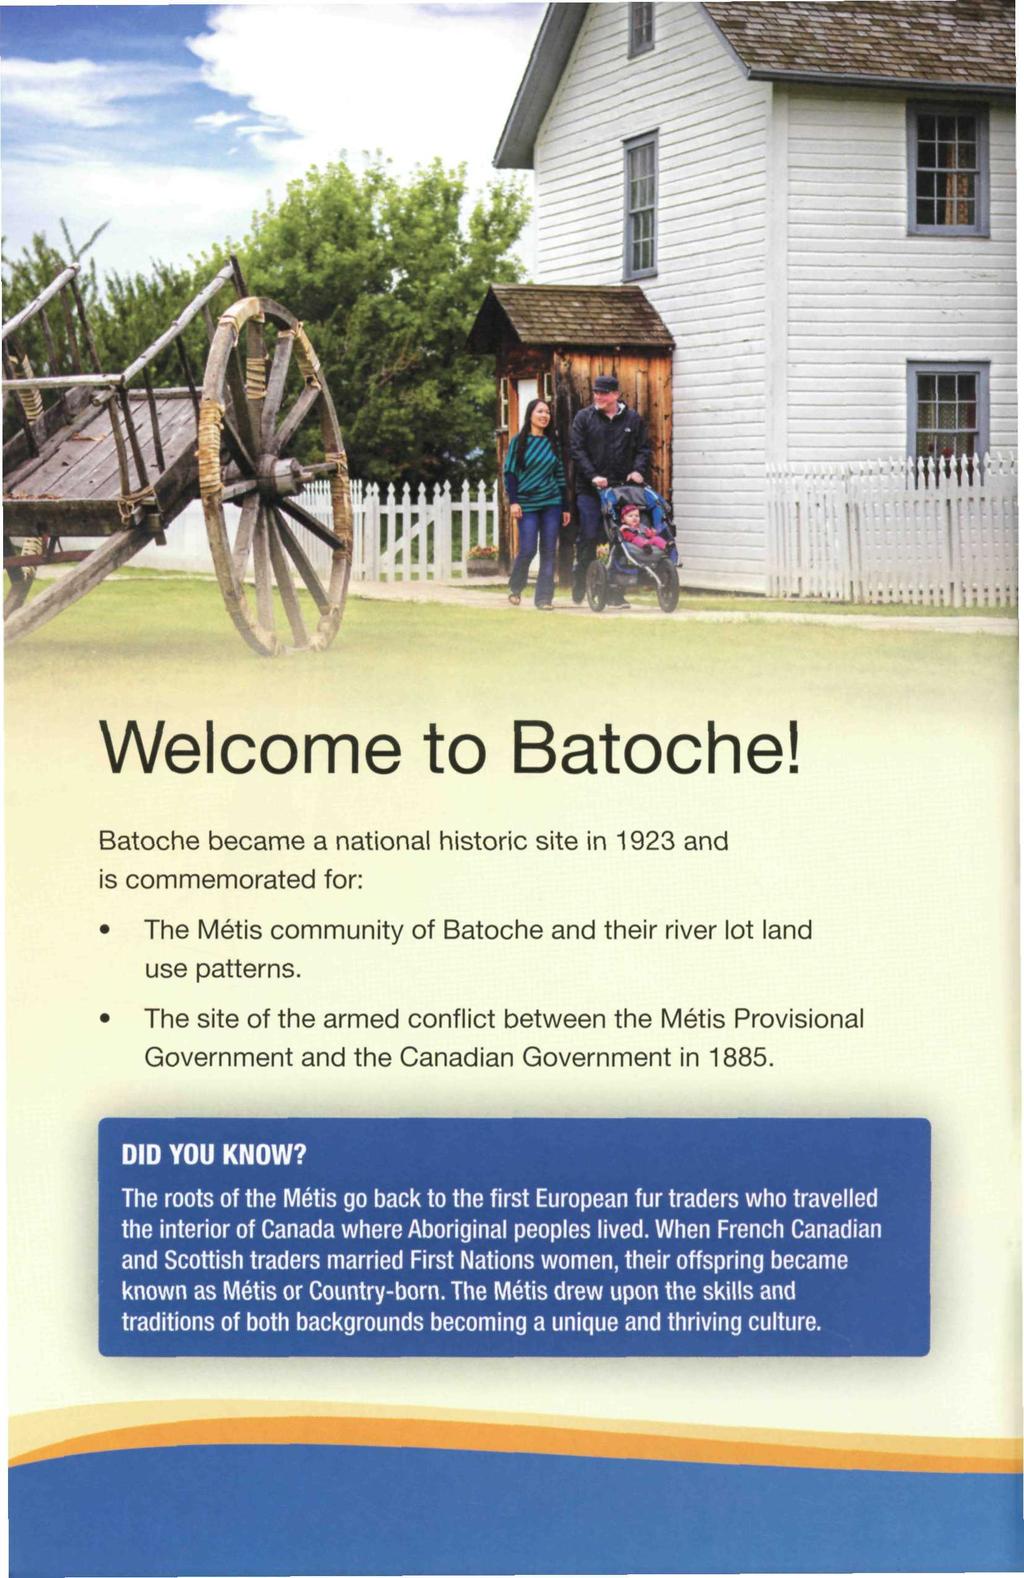 Welcome to Batoche! Batoche became a national historic site in 1923 and is commemorated for: The Métis community of Batoche and their river lot land use patterns.